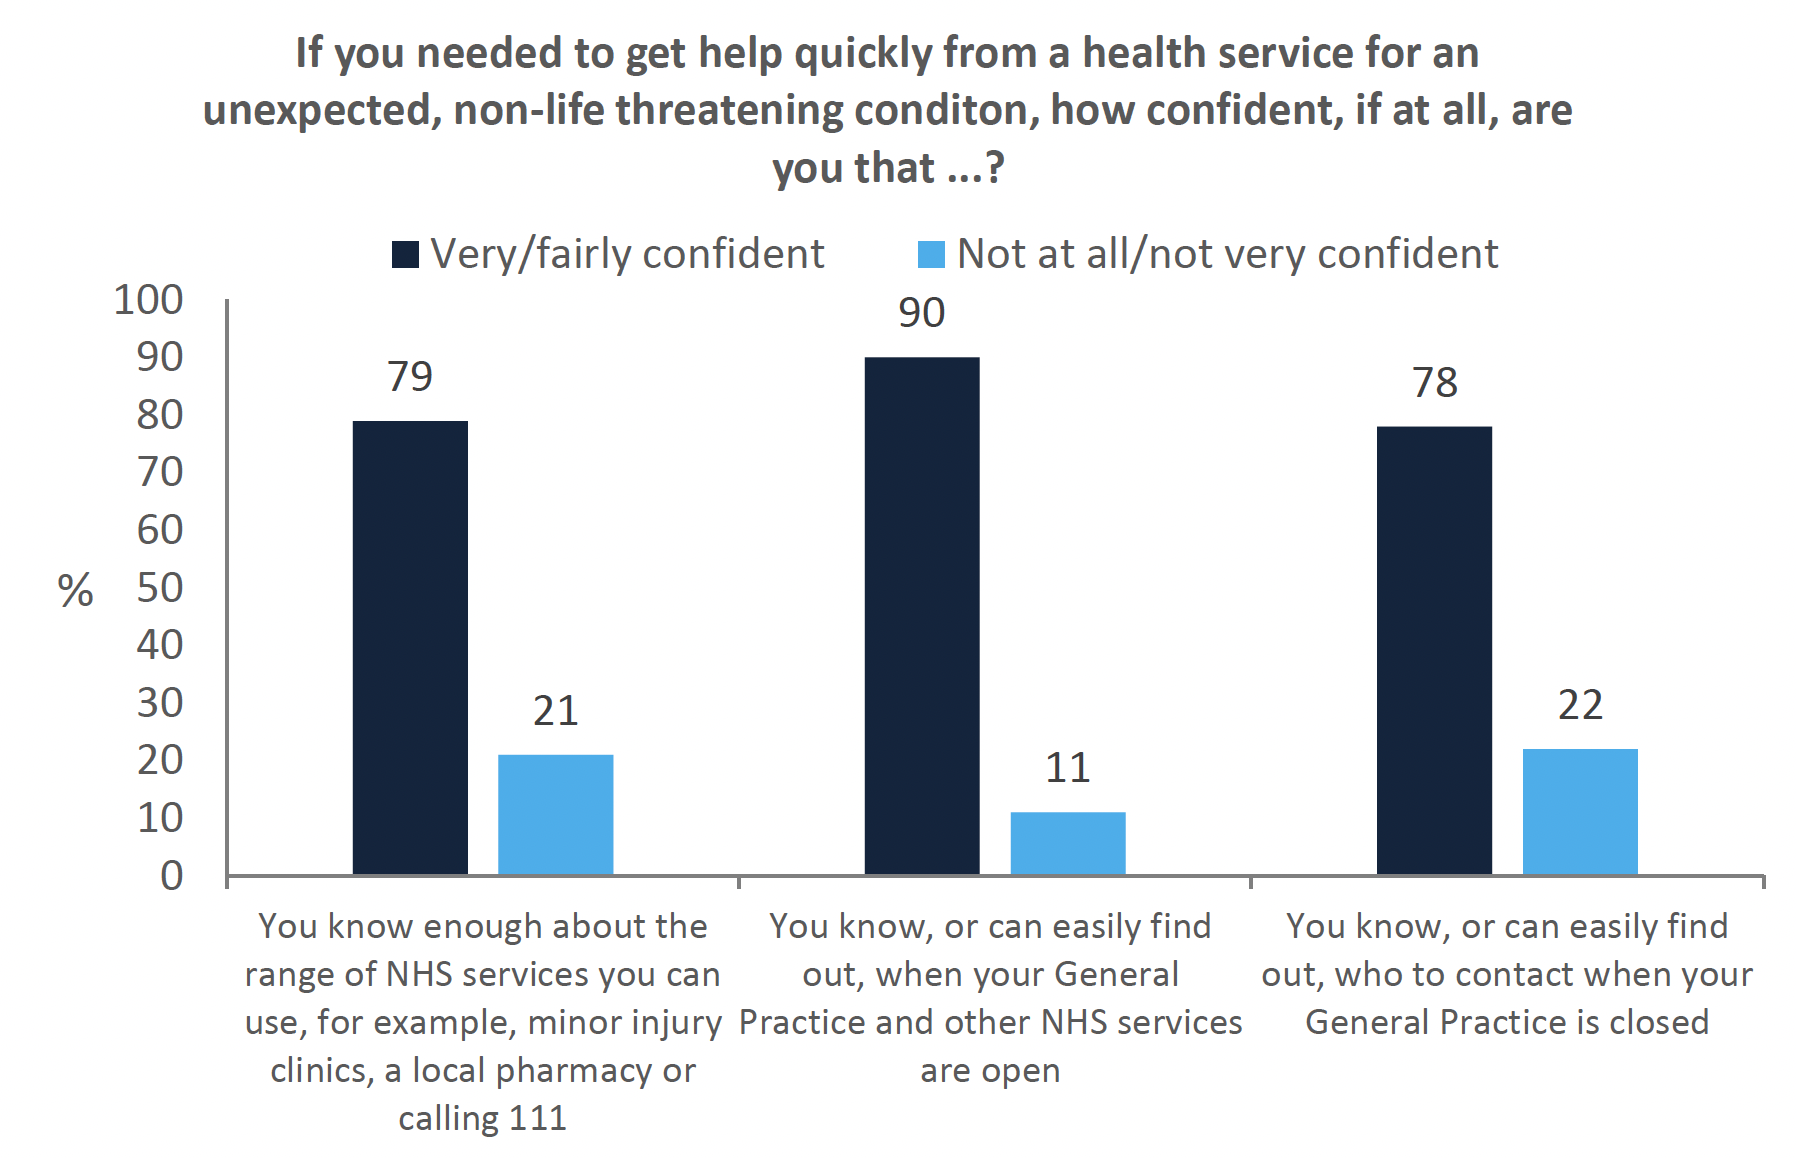 Multiple vertical bar graph showing confidence in finding information about out of hour services
A multiple vertical bar graph shows respondents confidence in finding information about general practice closing hours and where to get help out of hours if experiencing a non-life threatening condition. The options to select were You know enough about the range of NHS services you can use, You know, or can easily find out, when your General Practice and other NHS services are open, and You know, or can easily find out, who to contact when your General Practice is closed. Most respondents were very/fairly confident with all three options.